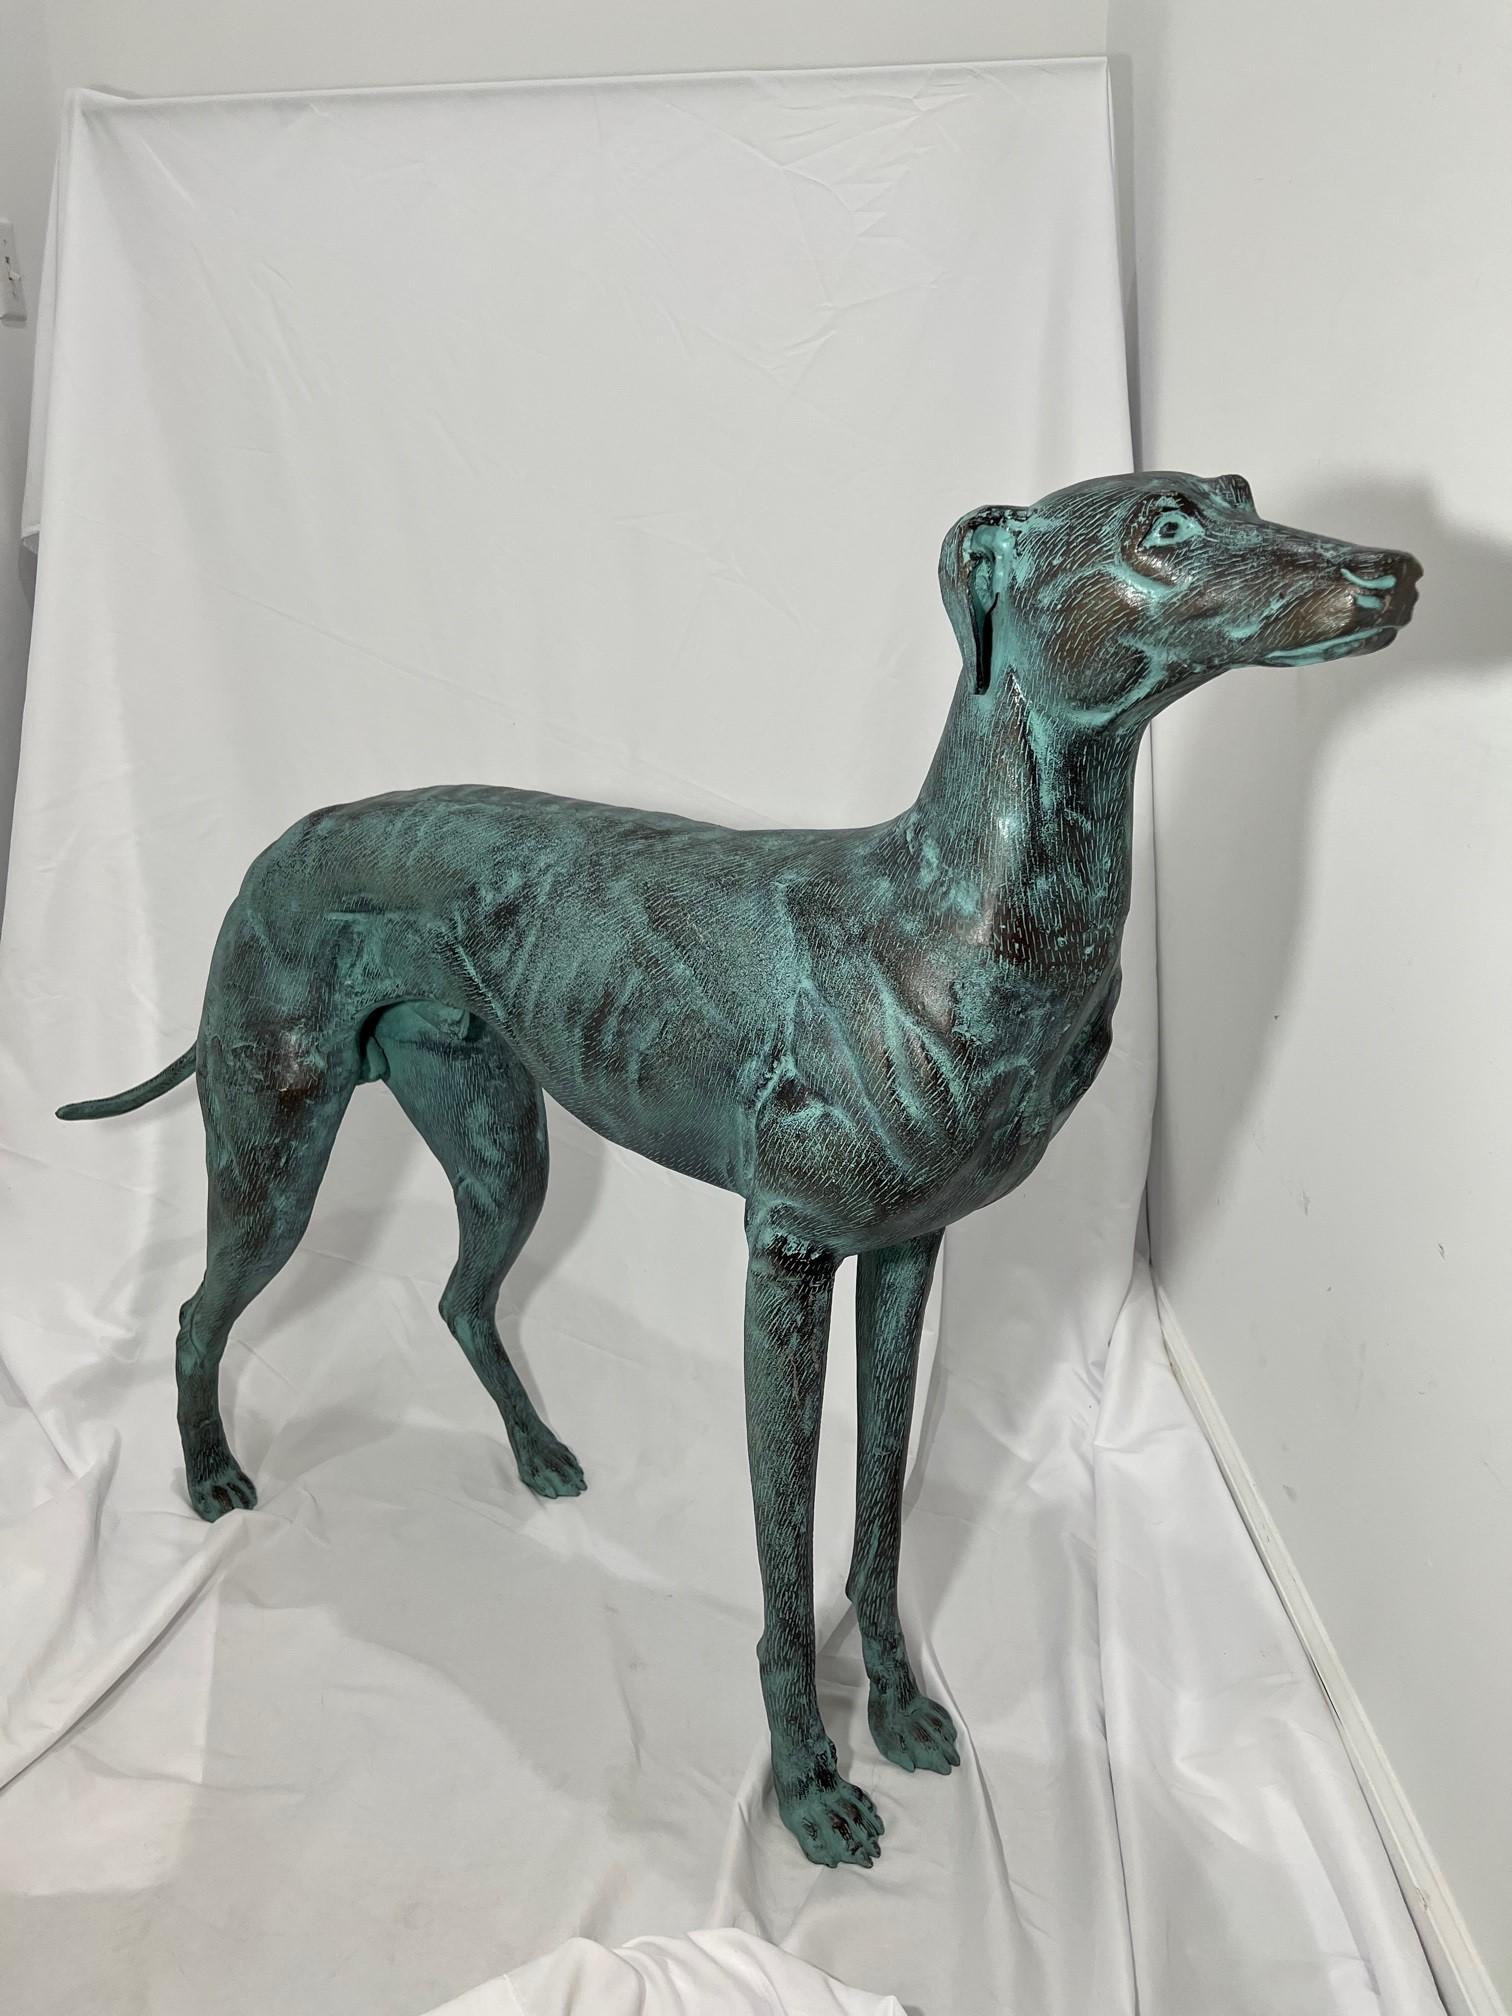 Gorgeous pair of elegant bronze greyhound dog statues life size in very good condition. They have a beautiful blueish green finish and would looks spectacular in any home or garden. I have two identical greyhound dog statues available they are sold